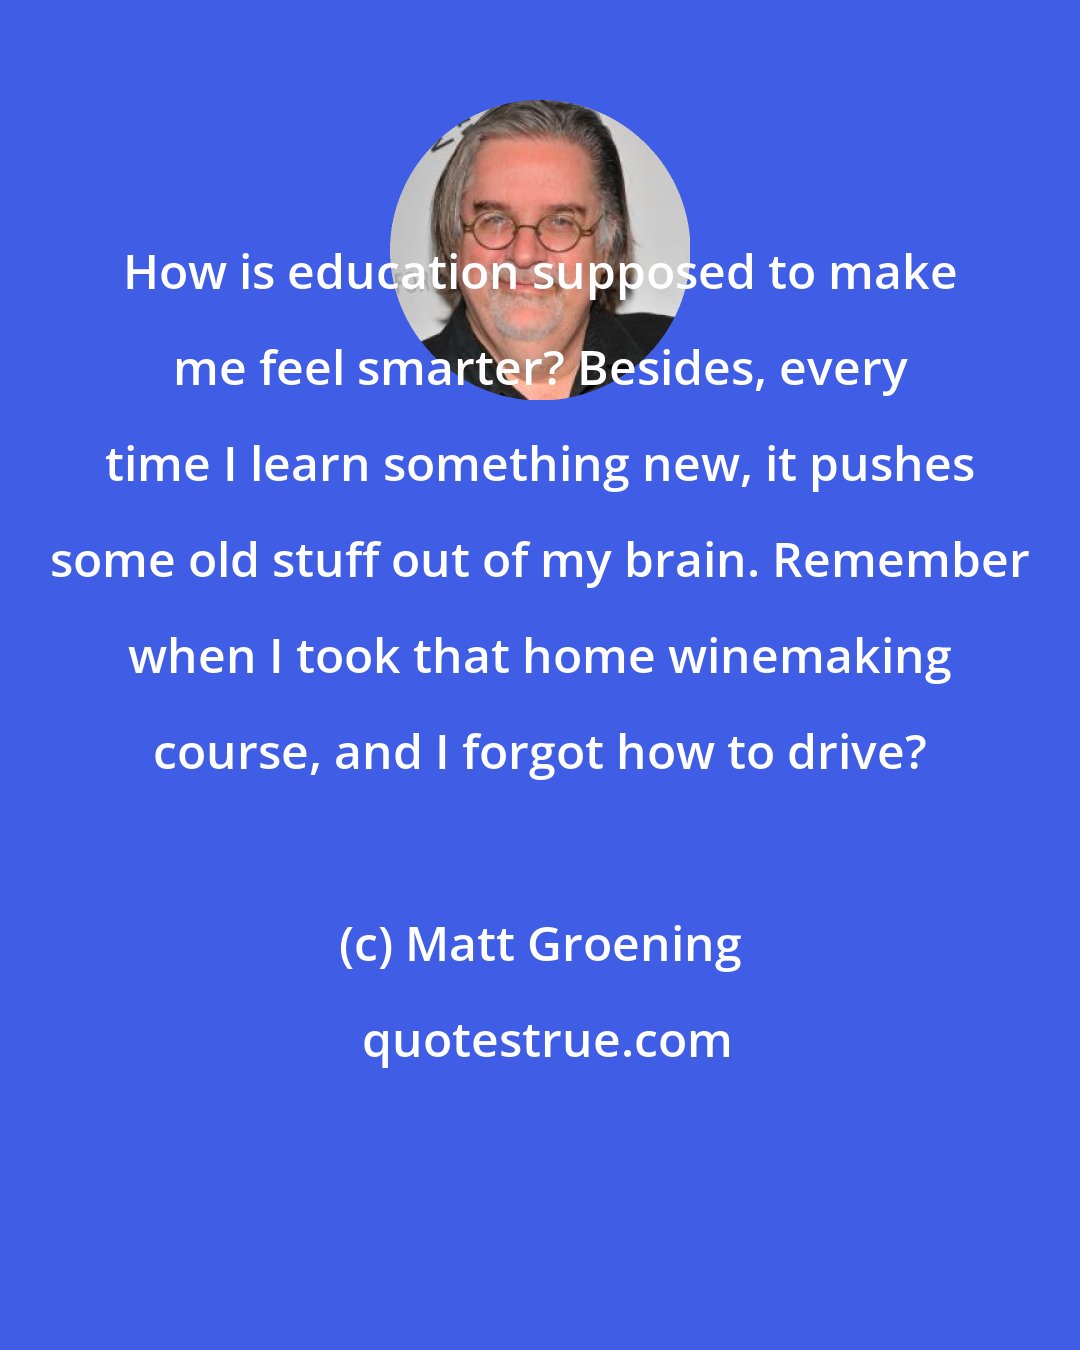 Matt Groening: How is education supposed to make me feel smarter? Besides, every time I learn something new, it pushes some old stuff out of my brain. Remember when I took that home winemaking course, and I forgot how to drive?